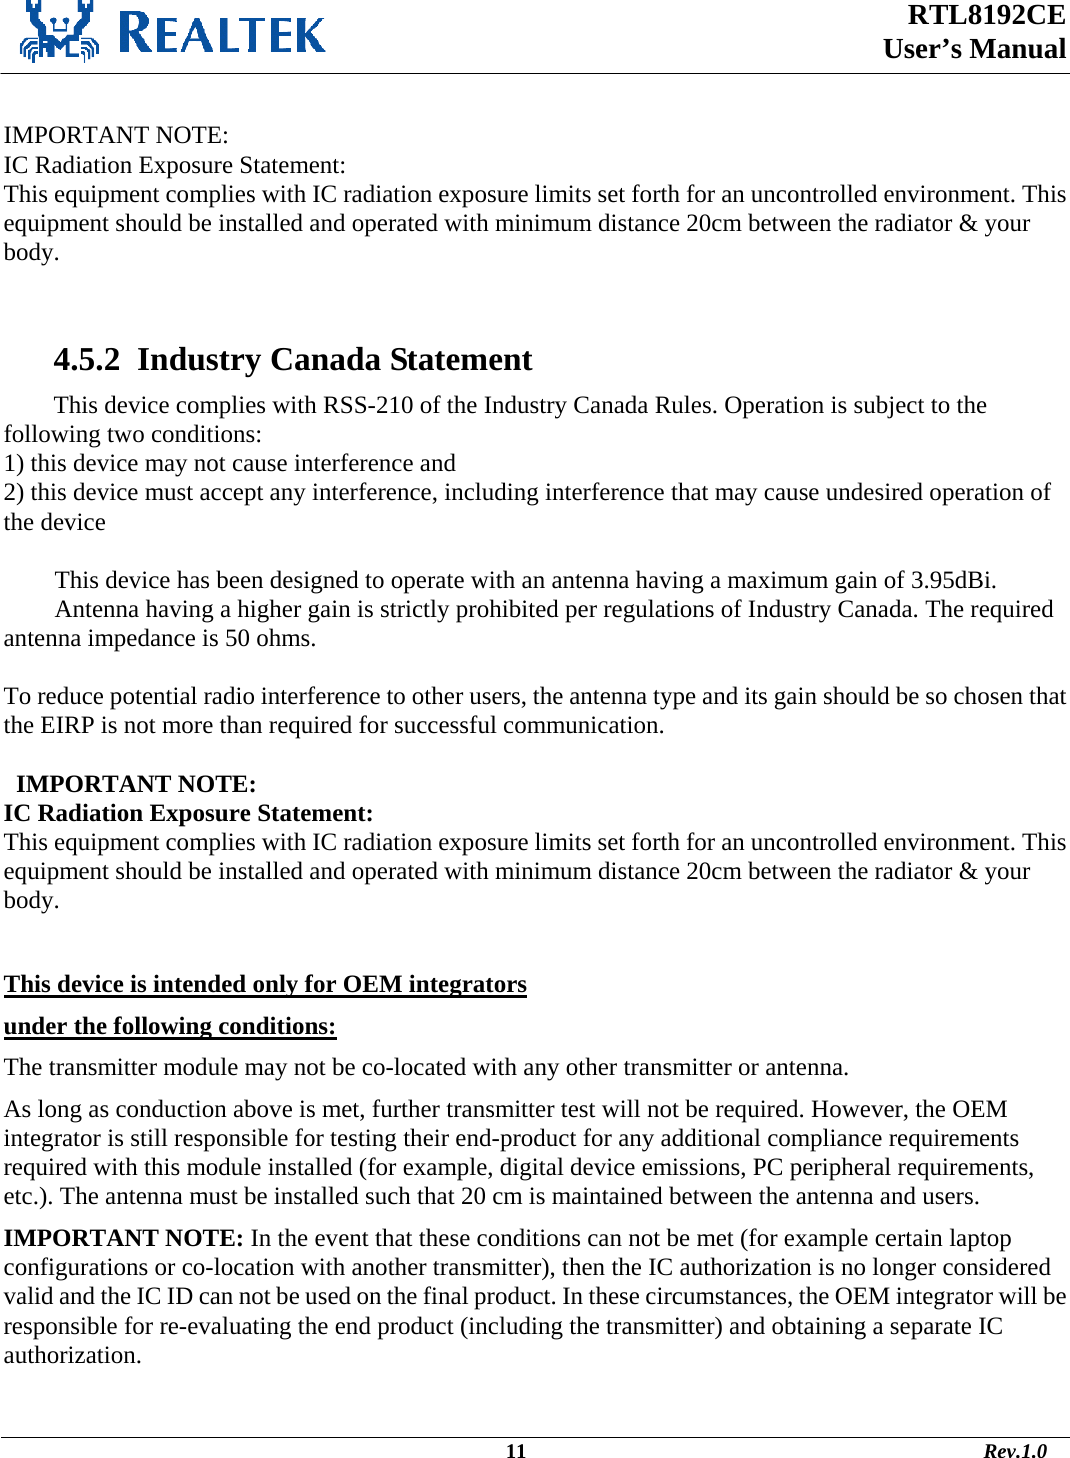  RTL8192CE  User’s Manual     IMPORTANT NOTE: IC Radiation Exposure Statement: This equipment complies with IC radiation exposure limits set forth for an uncontrolled environment. This equipment should be installed and operated with minimum distance 20cm between the radiator &amp; your body.    4.5.2  Industry Canada Statement This device complies with RSS-210 of the Industry Canada Rules. Operation is subject to the following two conditions: 1) this device may not cause interference and 2) this device must accept any interference, including interference that may cause undesired operation of the device  This device has been designed to operate with an antenna having a maximum gain of 3.95dBi. Antenna having a higher gain is strictly prohibited per regulations of Industry Canada. The required antenna impedance is 50 ohms.  To reduce potential radio interference to other users, the antenna type and its gain should be so chosen that the EIRP is not more than required for successful communication.    IMPORTANT NOTE: IC Radiation Exposure Statement: This equipment complies with IC radiation exposure limits set forth for an uncontrolled environment. This equipment should be installed and operated with minimum distance 20cm between the radiator &amp; your body.  This device is intended only for OEM integrators  under the following conditions: The transmitter module may not be co-located with any other transmitter or antenna. As long as conduction above is met, further transmitter test will not be required. However, the OEM integrator is still responsible for testing their end-product for any additional compliance requirements required with this module installed (for example, digital device emissions, PC peripheral requirements, etc.). The antenna must be installed such that 20 cm is maintained between the antenna and users. IMPORTANT NOTE: In the event that these conditions can not be met (for example certain laptop configurations or co-location with another transmitter), then the IC authorization is no longer considered valid and the IC ID can not be used on the final product. In these circumstances, the OEM integrator will be responsible for re-evaluating the end product (including the transmitter) and obtaining a separate IC authorization.                                                                                              11                                                                                       Rev.1.0 